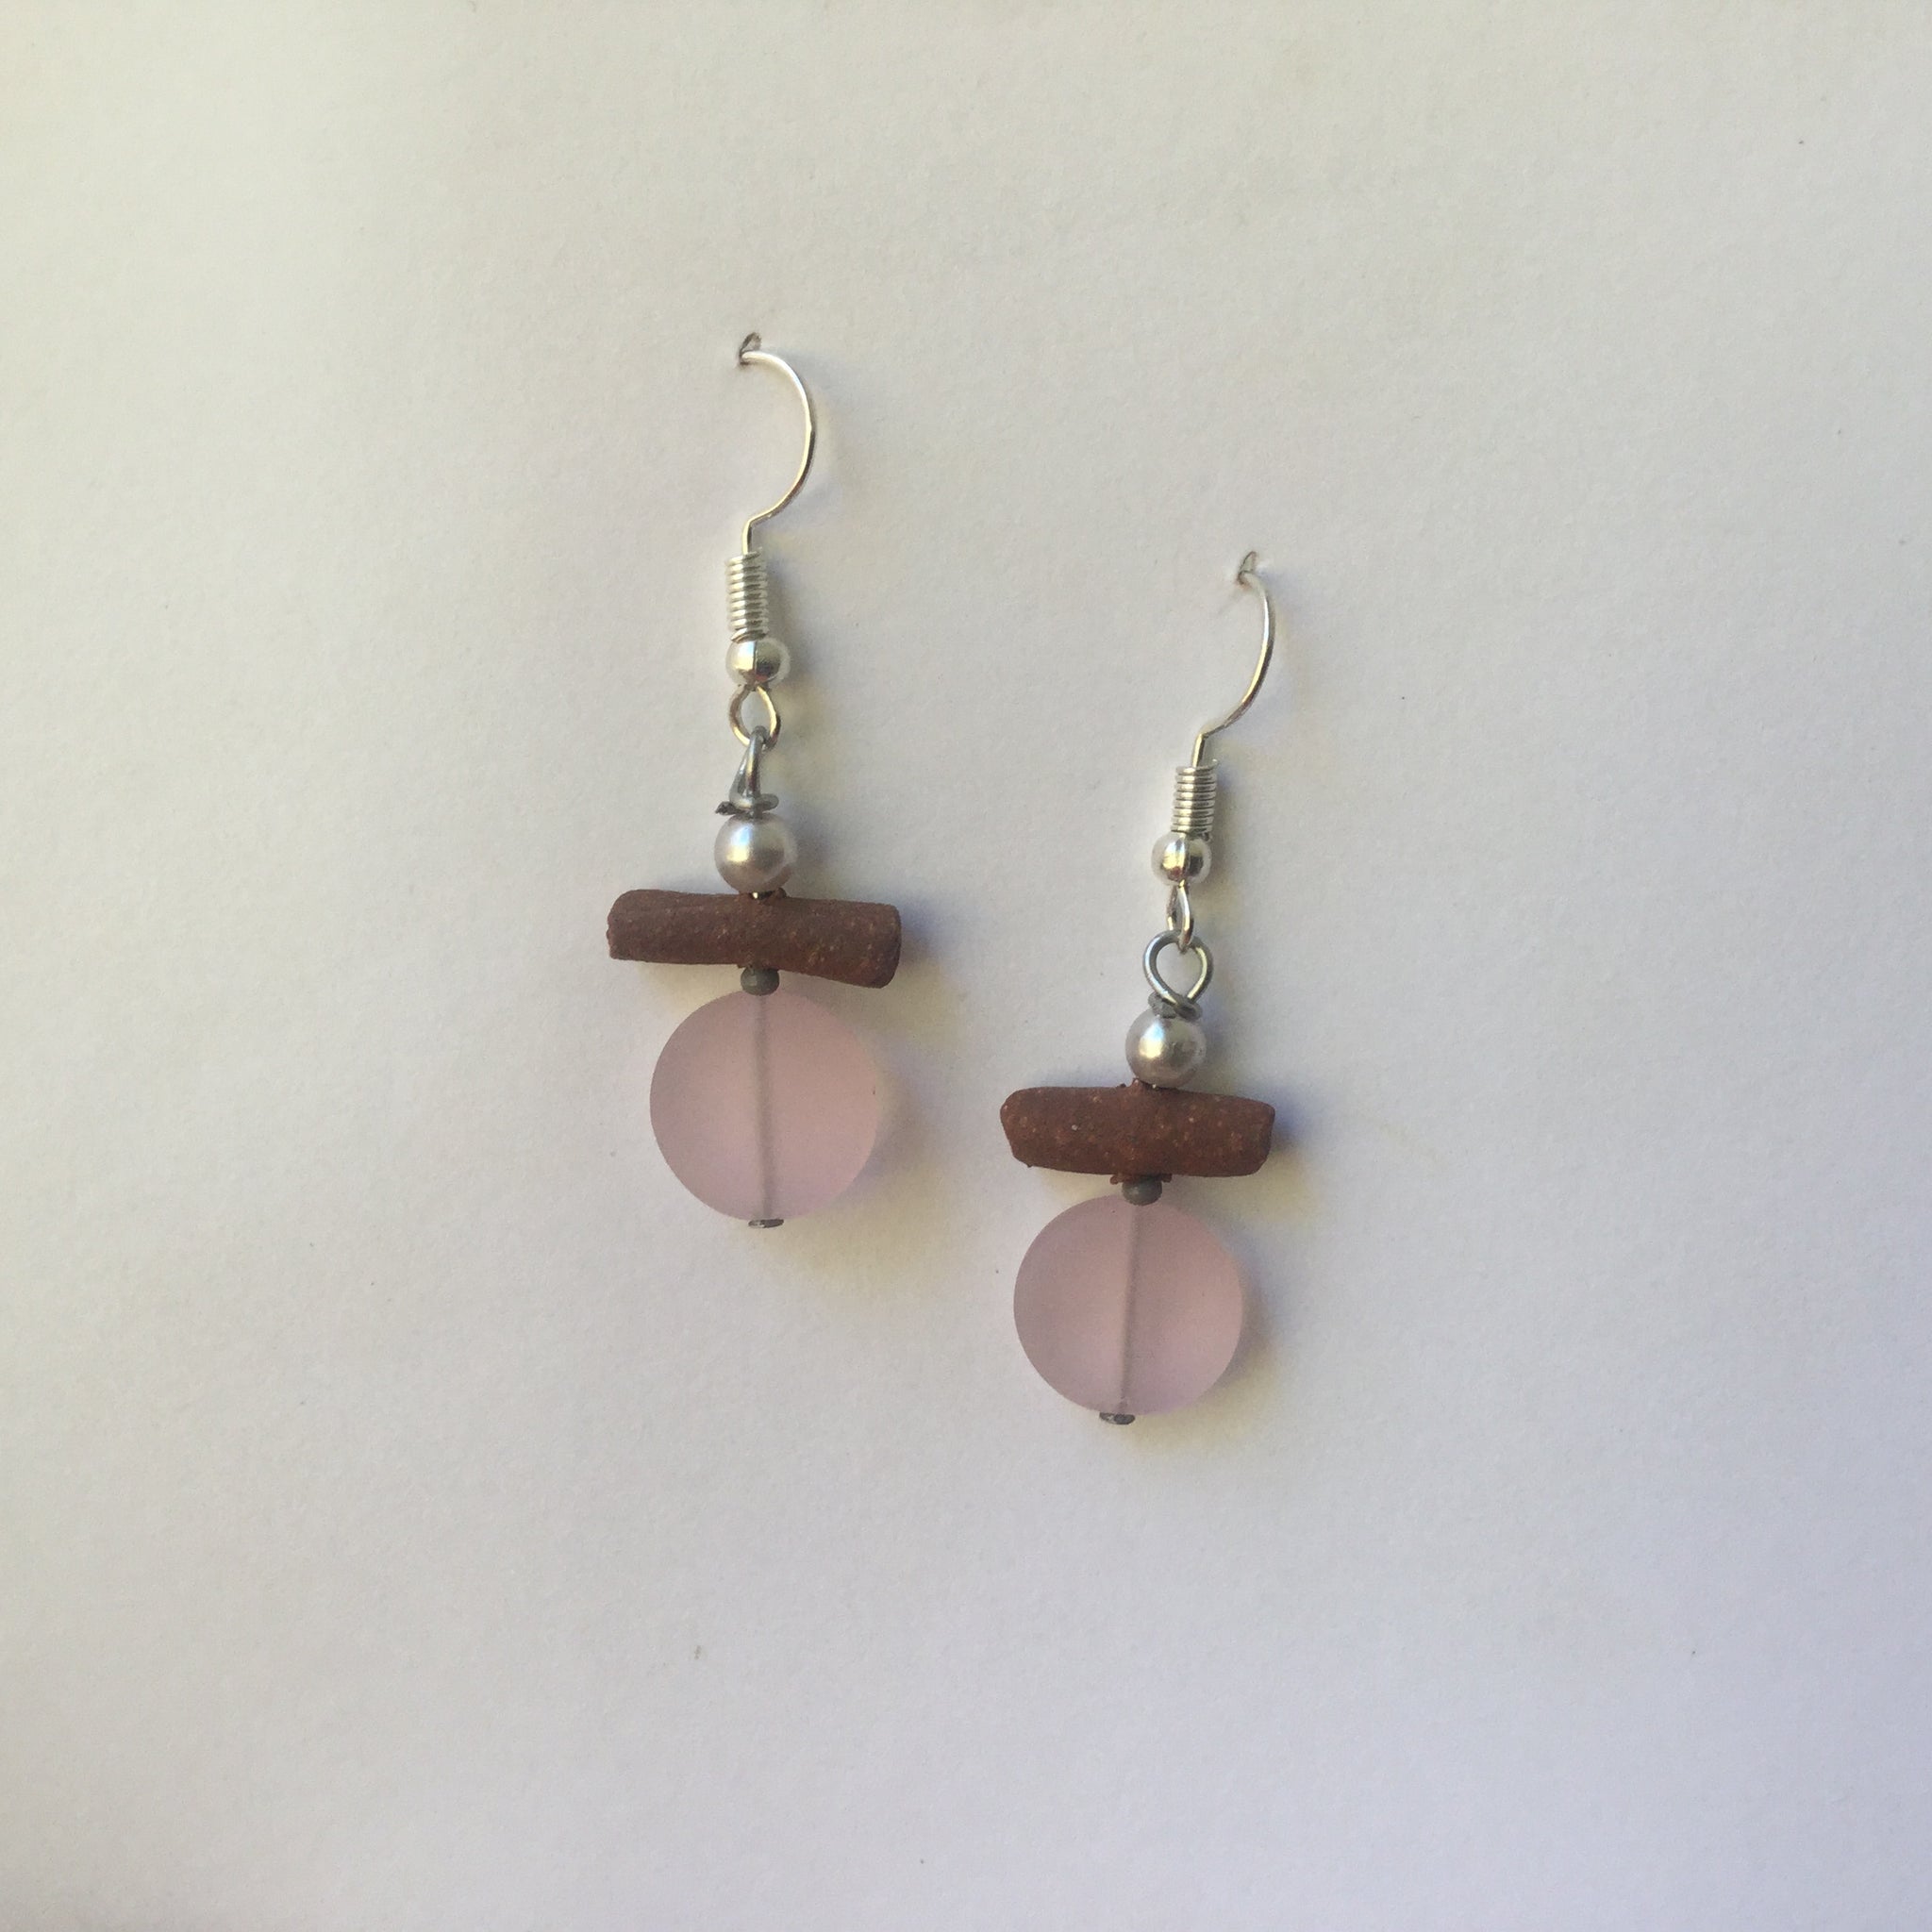 Pink Seaglass Earrings with hand-made stoneware beads. Surgical steel ear-wire, frosted glass and shell beads